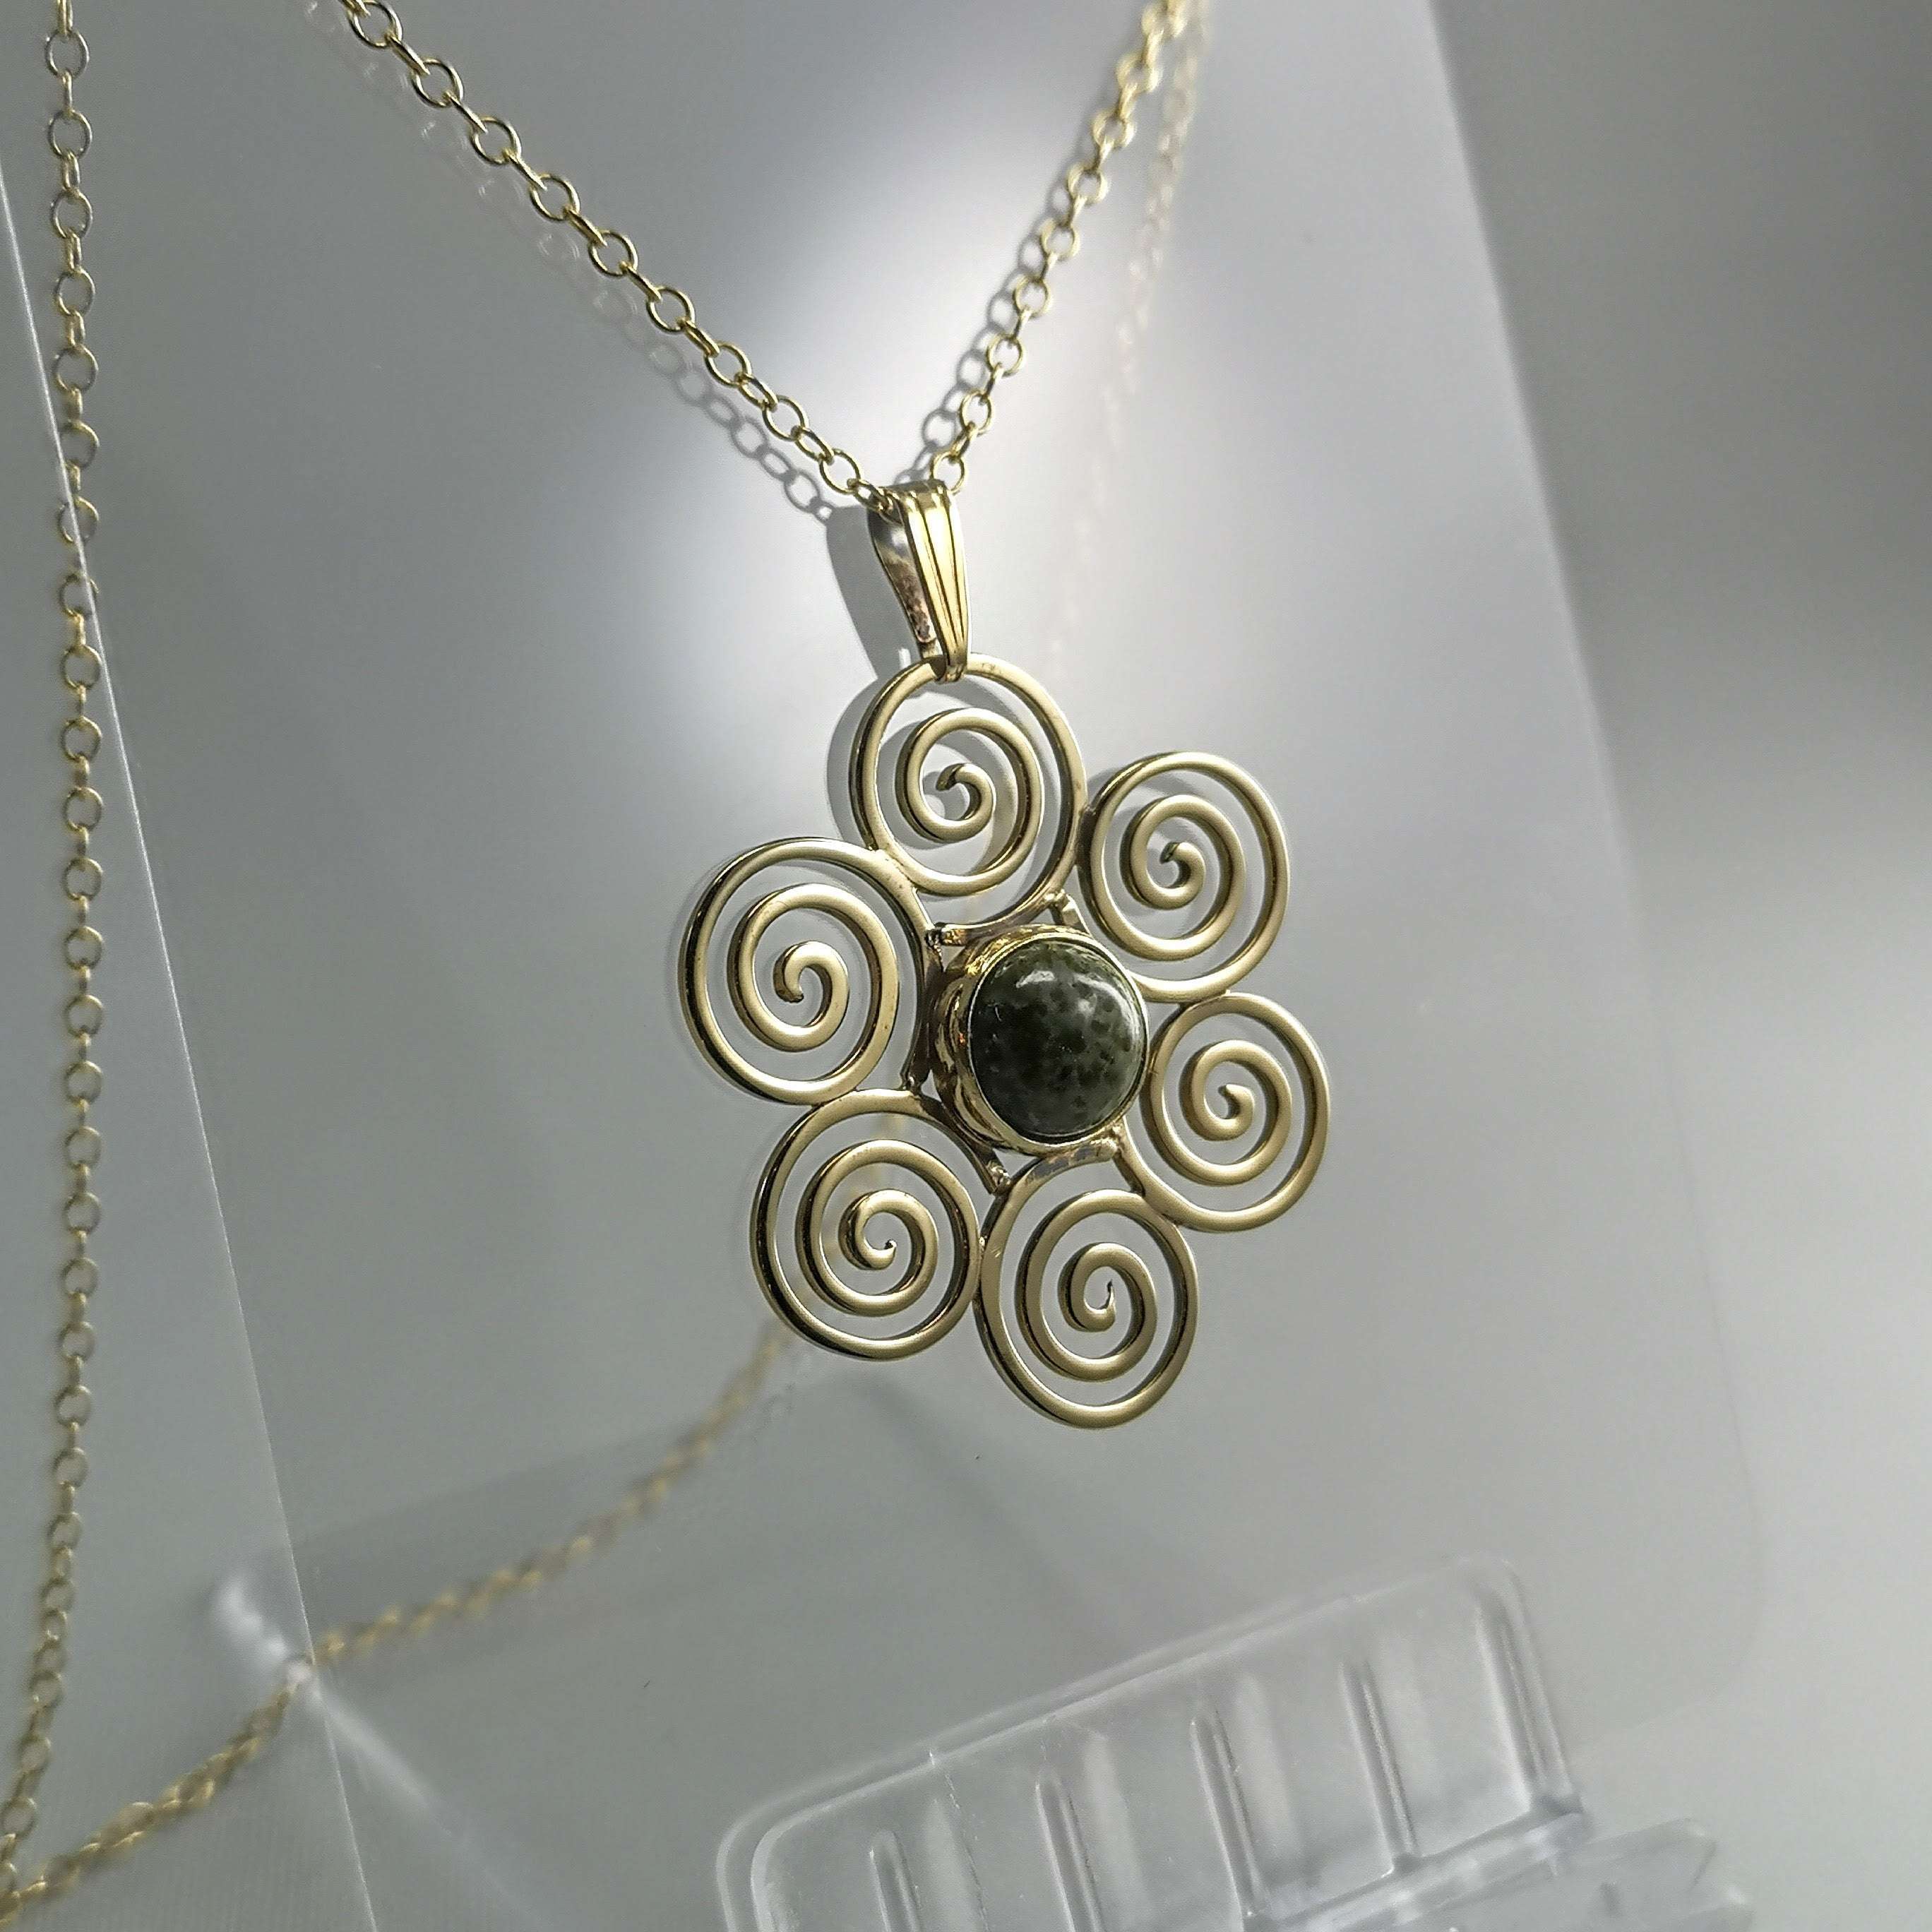 9ct Gold large pendant with a green marble stone surrounded with classic spiral designs and with 18" chain.